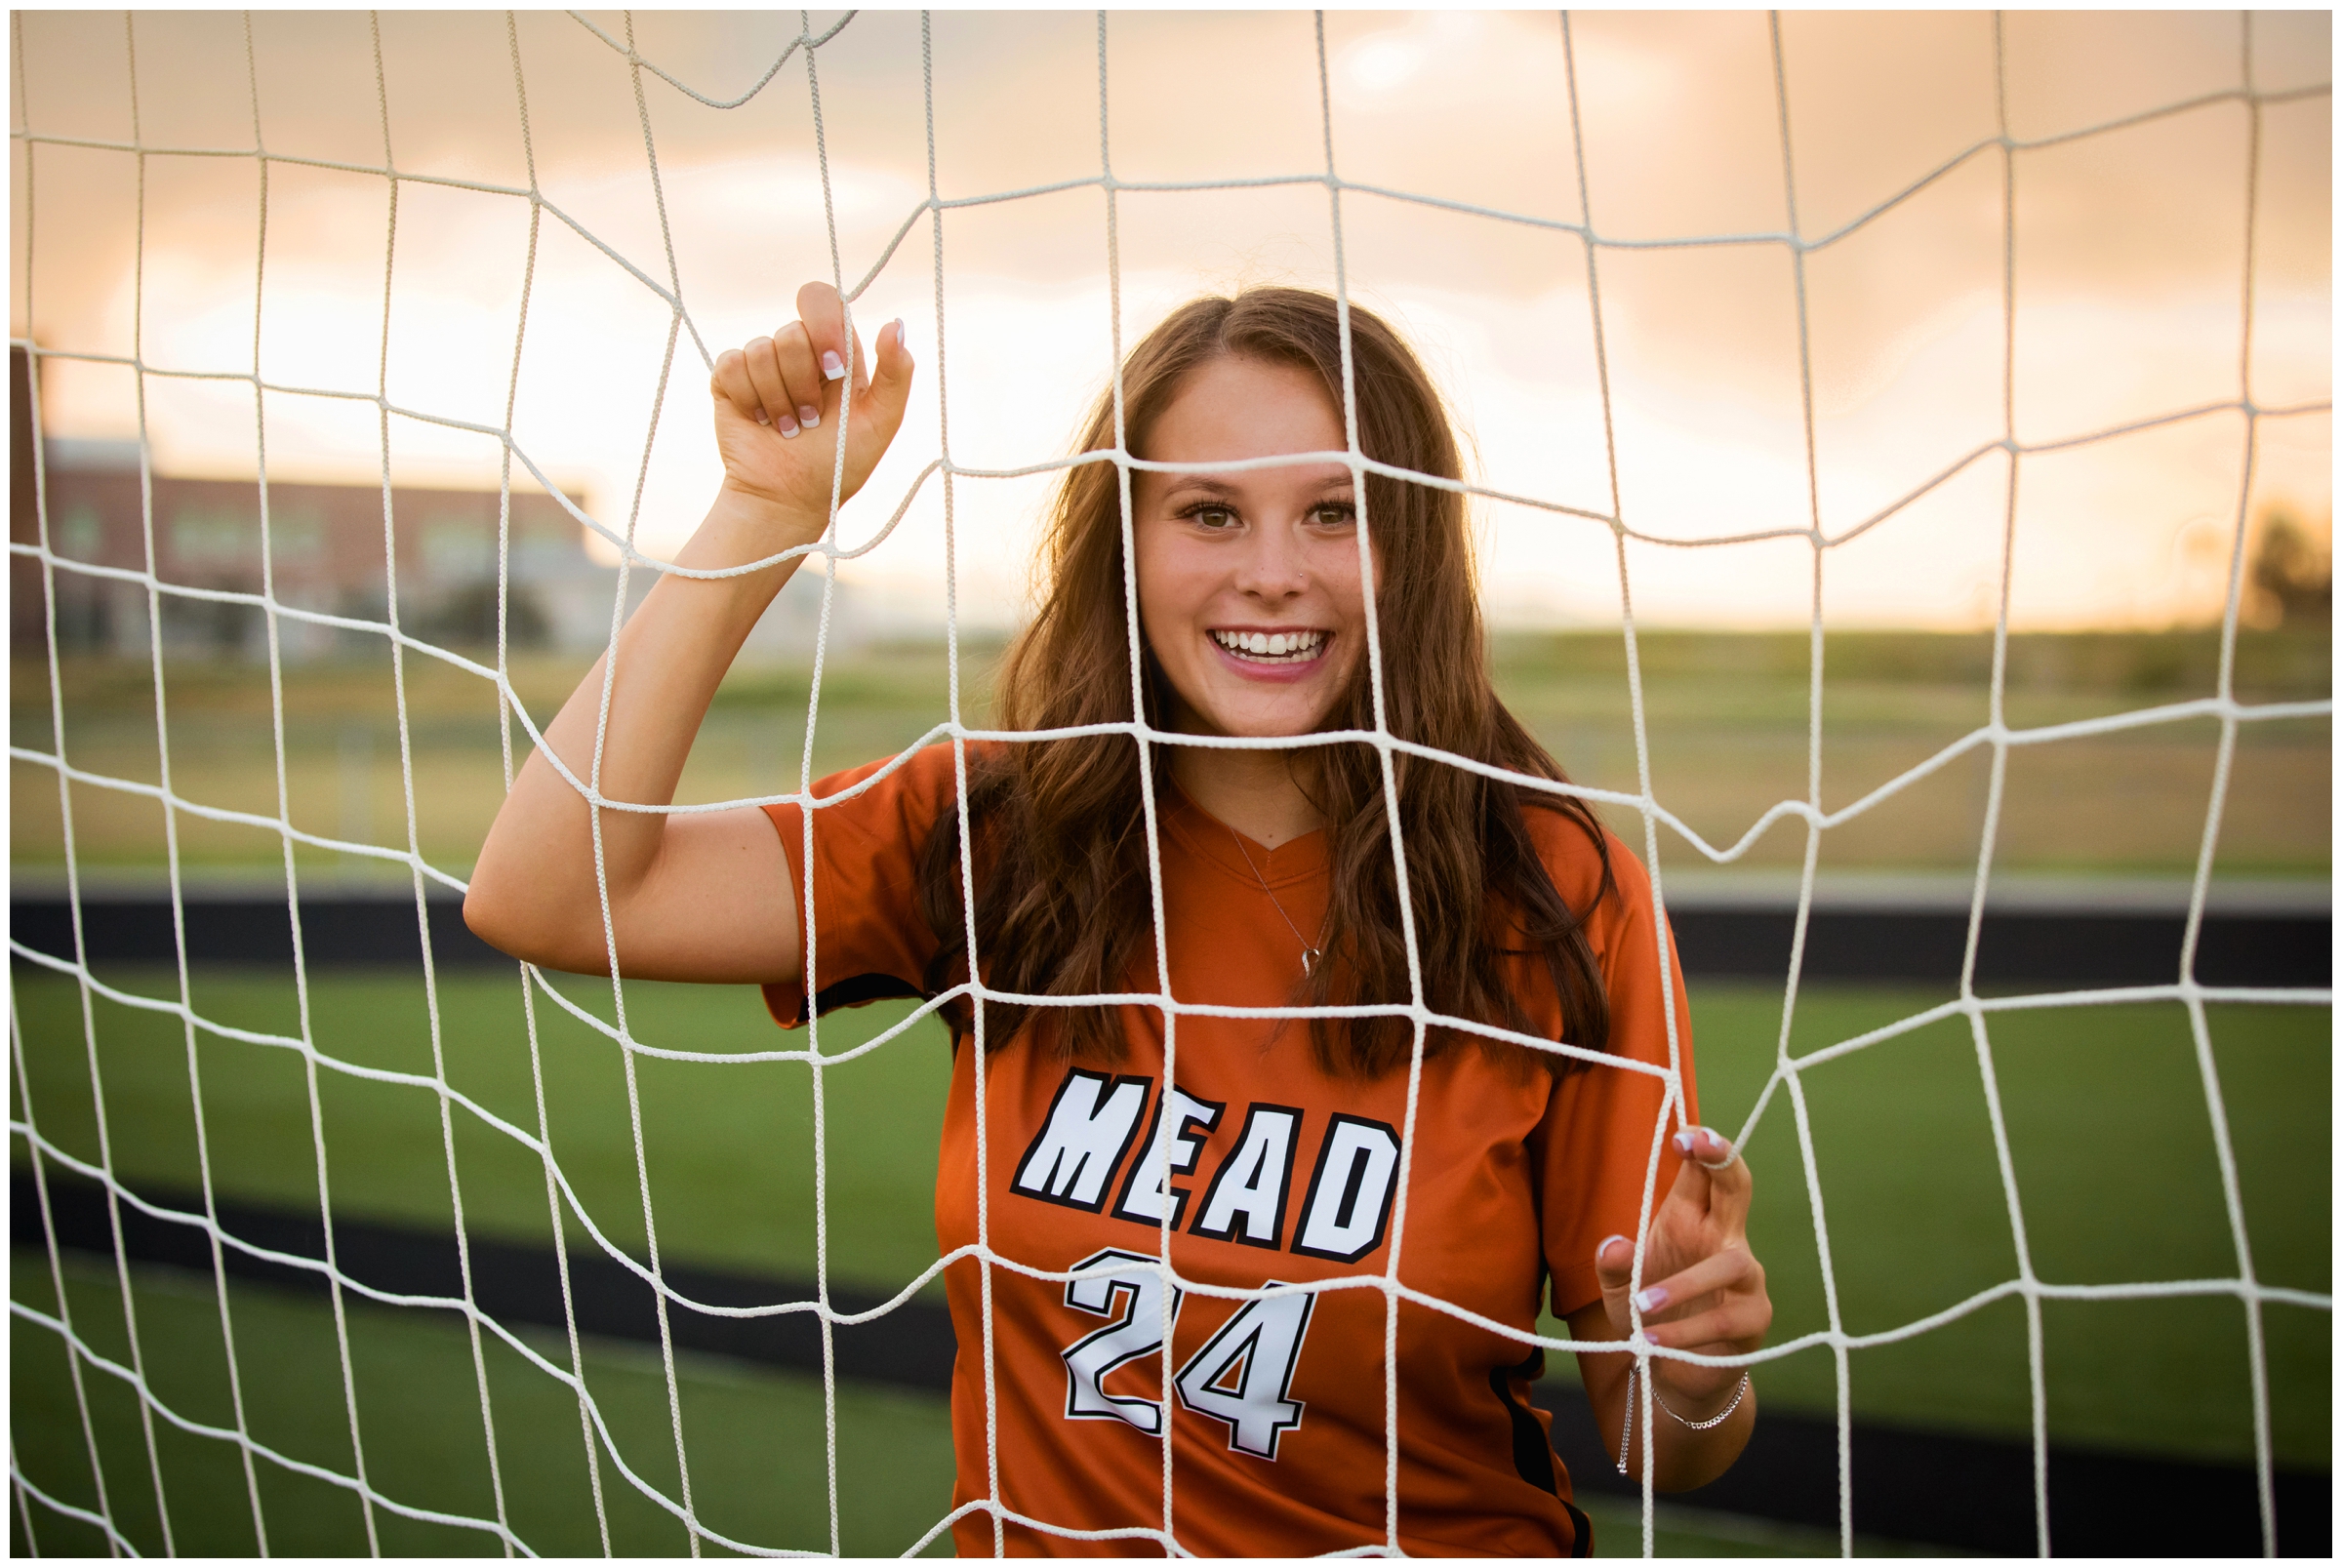 soccer senior photos for Mead High School Colorado student by Plum Pretty Photography